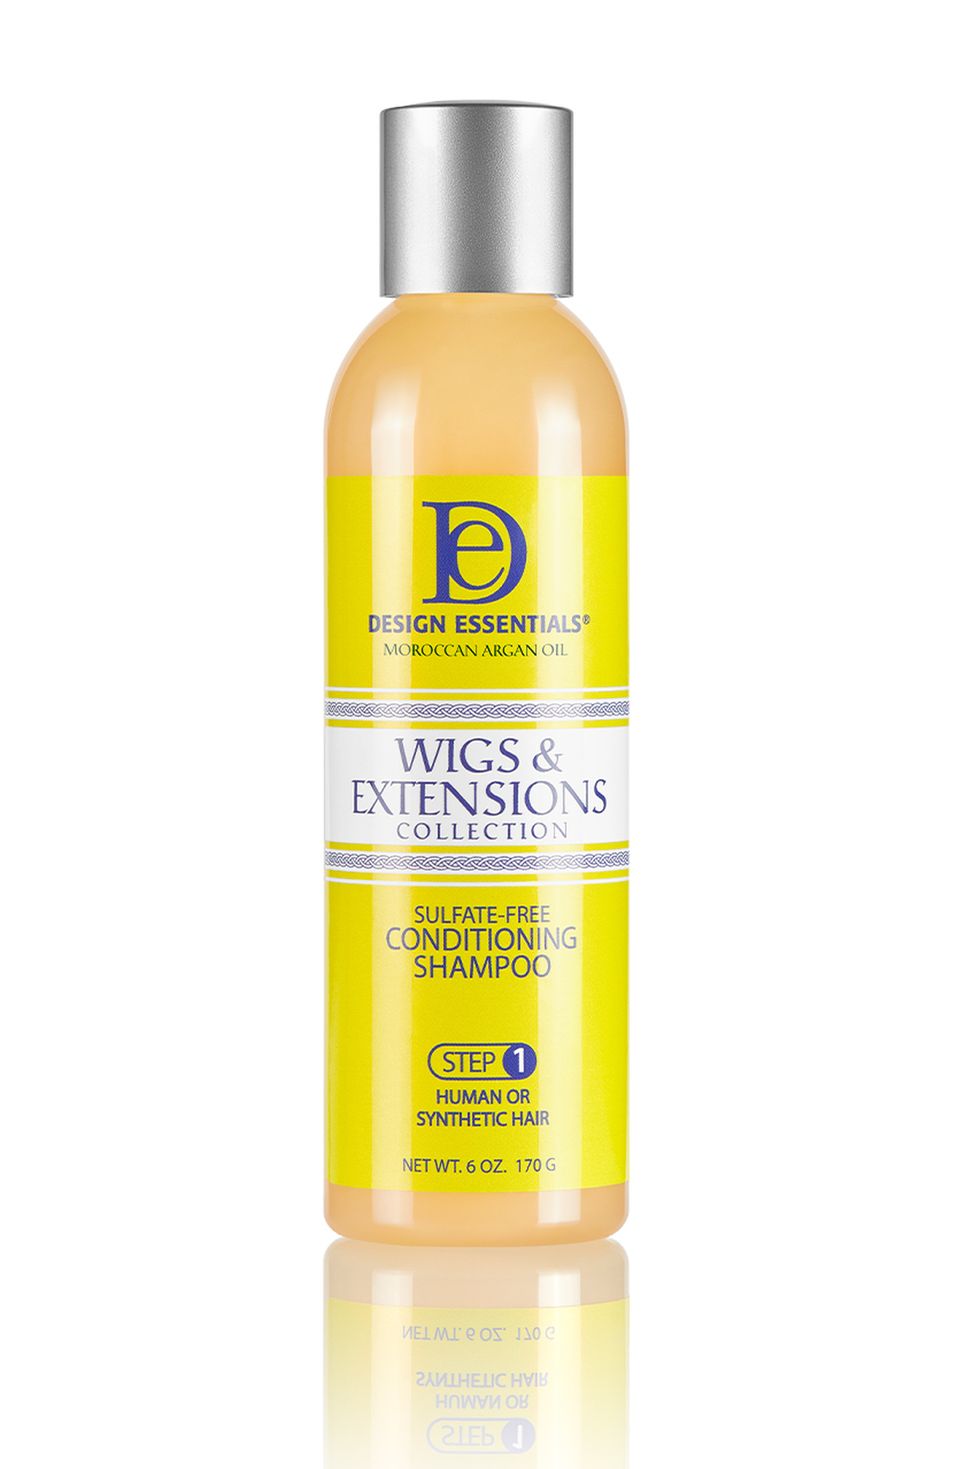 Wigs & Extensions Sulfate-Free Conditioning Shampoo